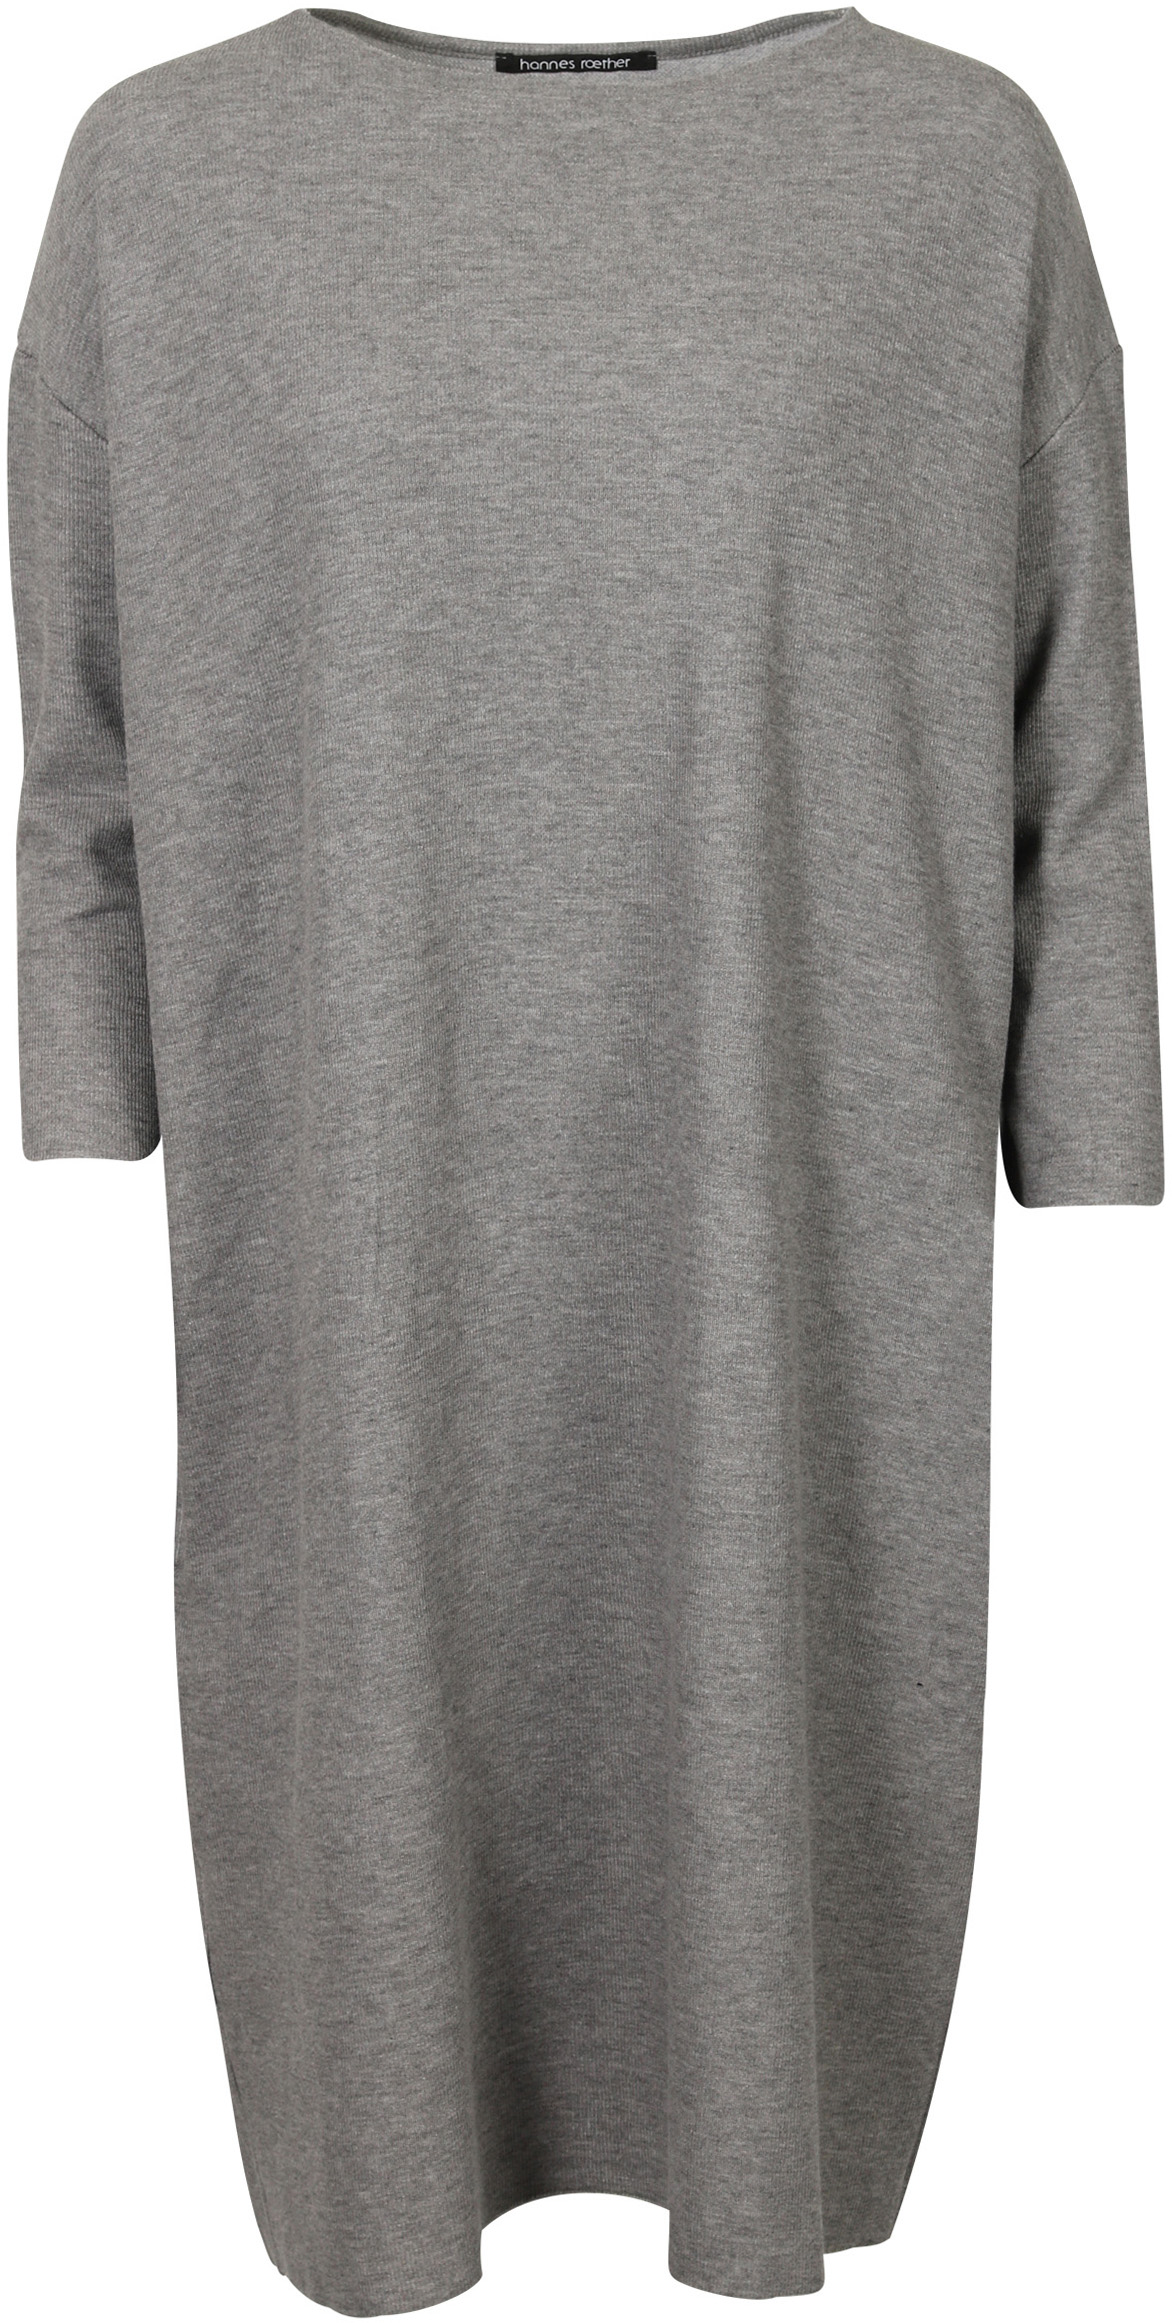 Hannes Roether Cotton Dress Mid Grey M